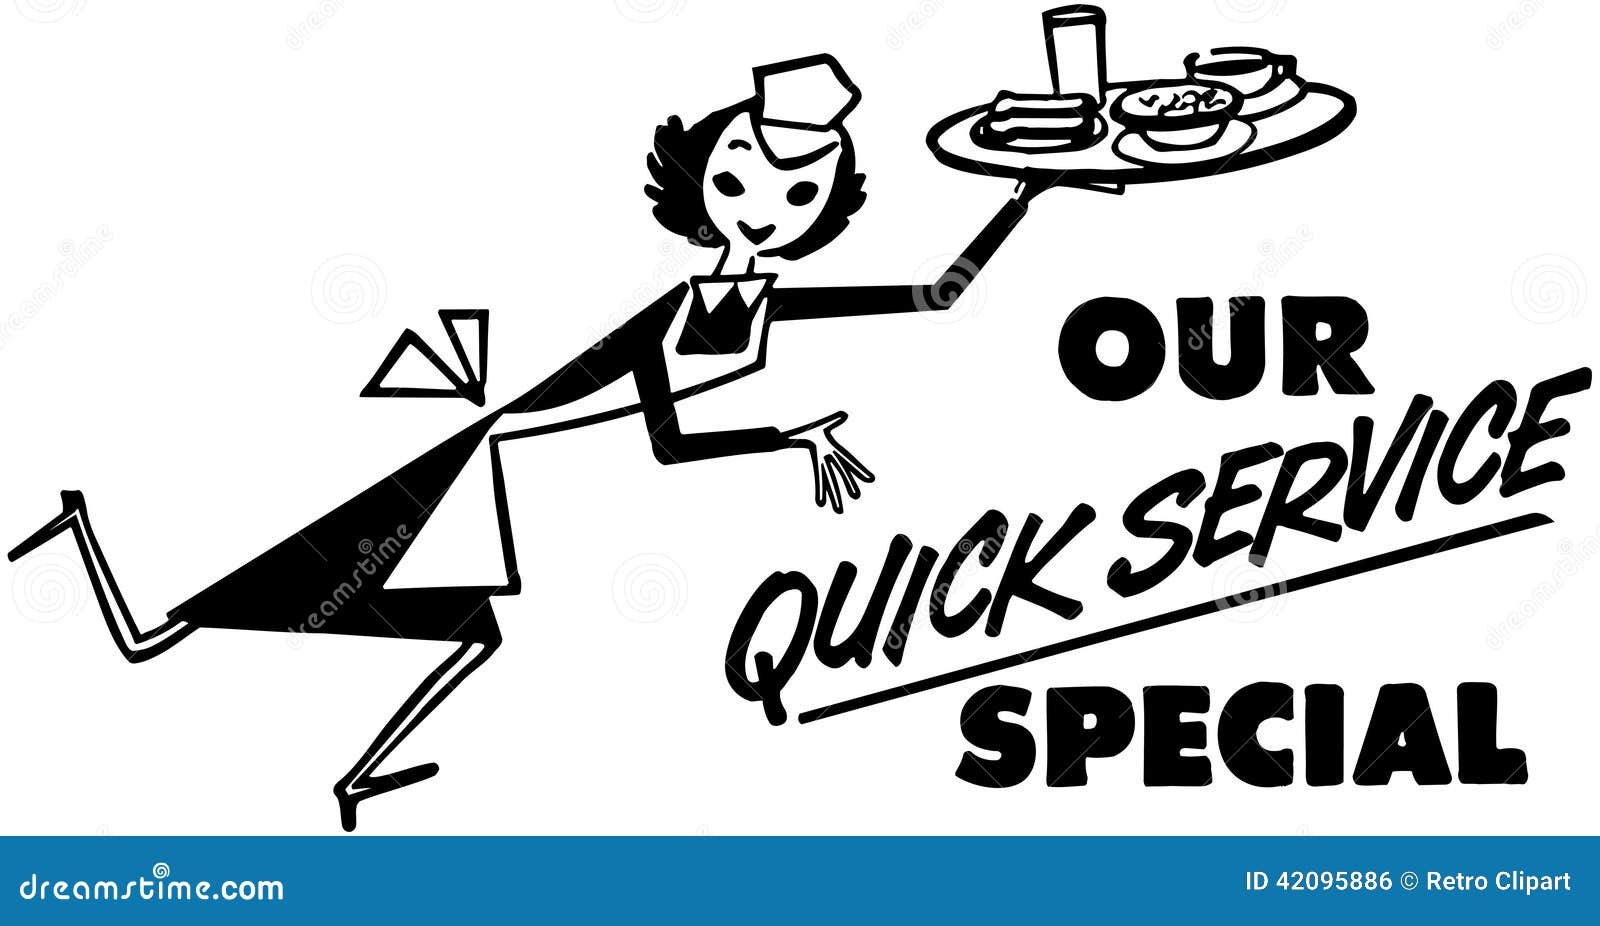 Our Quick Service Special stock vector. Illustration of hotdogs - 42095886